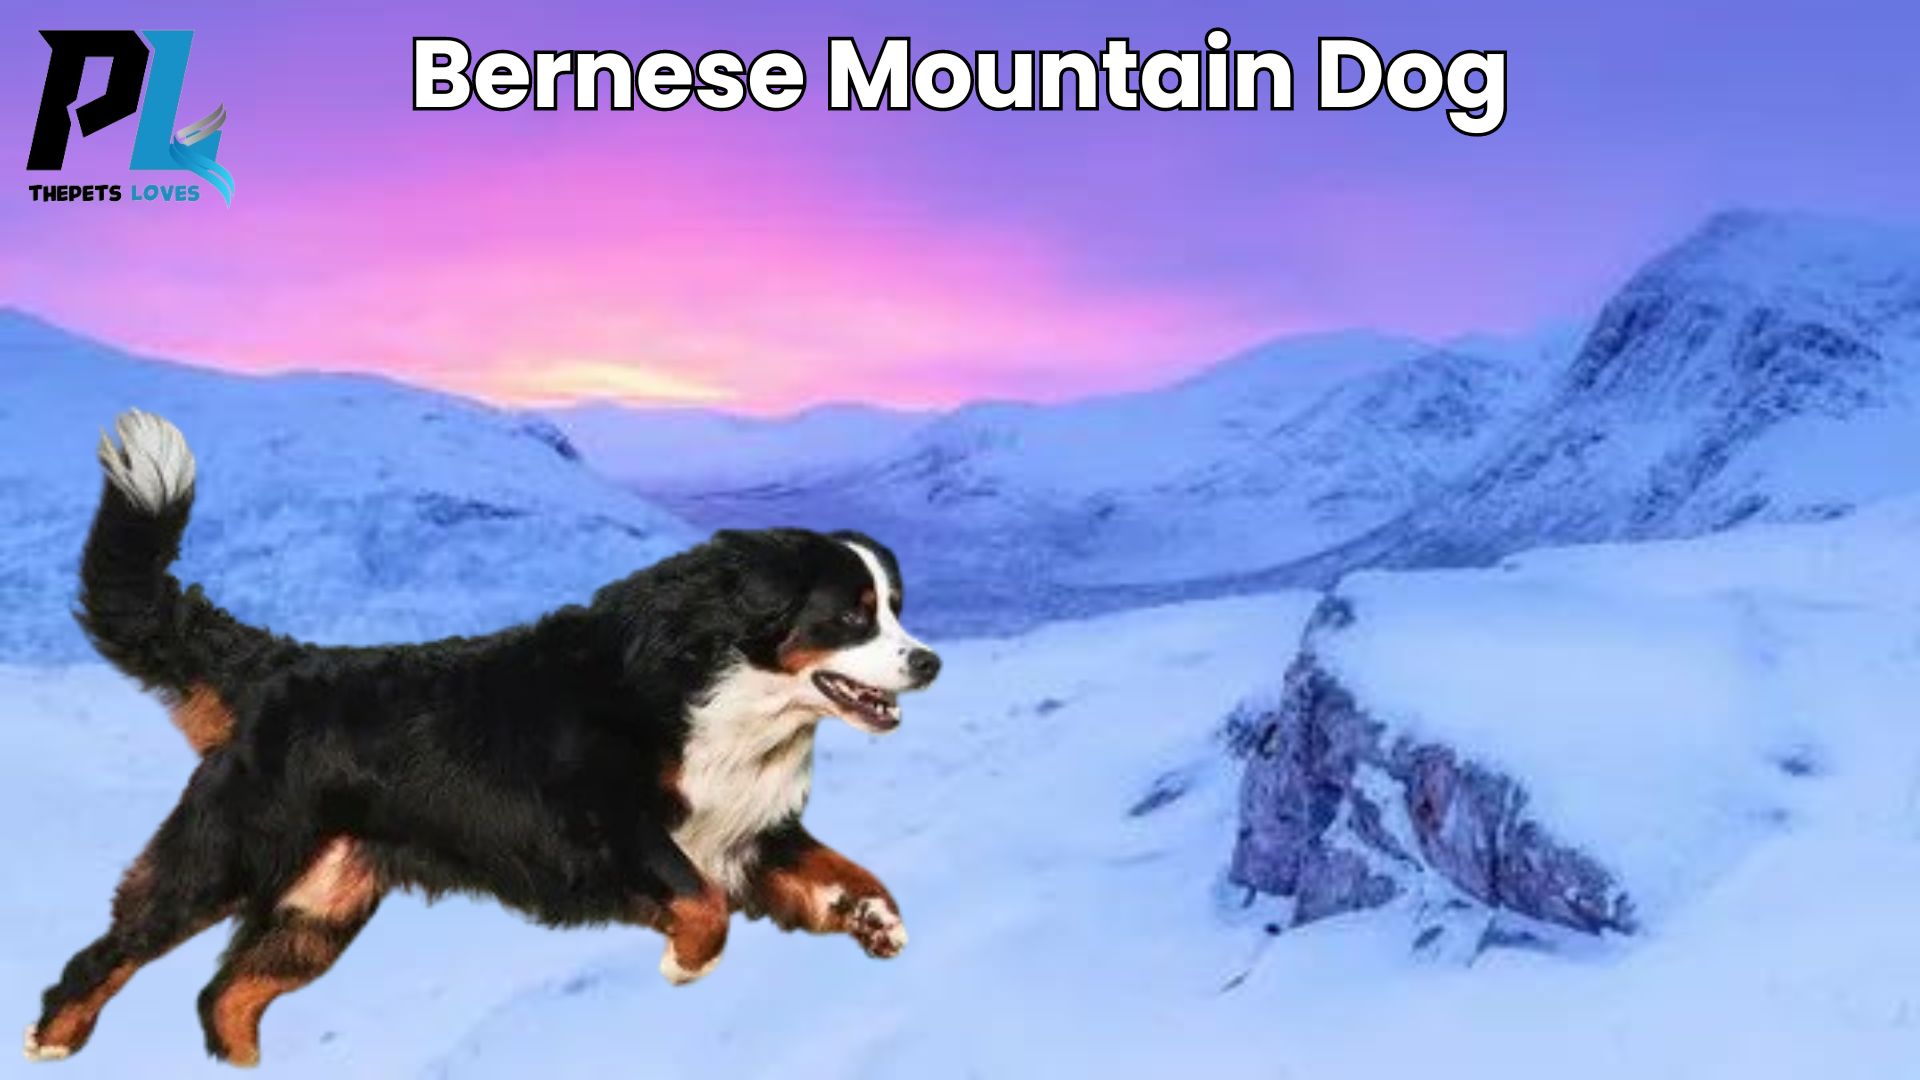 What are Bernese mountain dog? And their famous characteristics